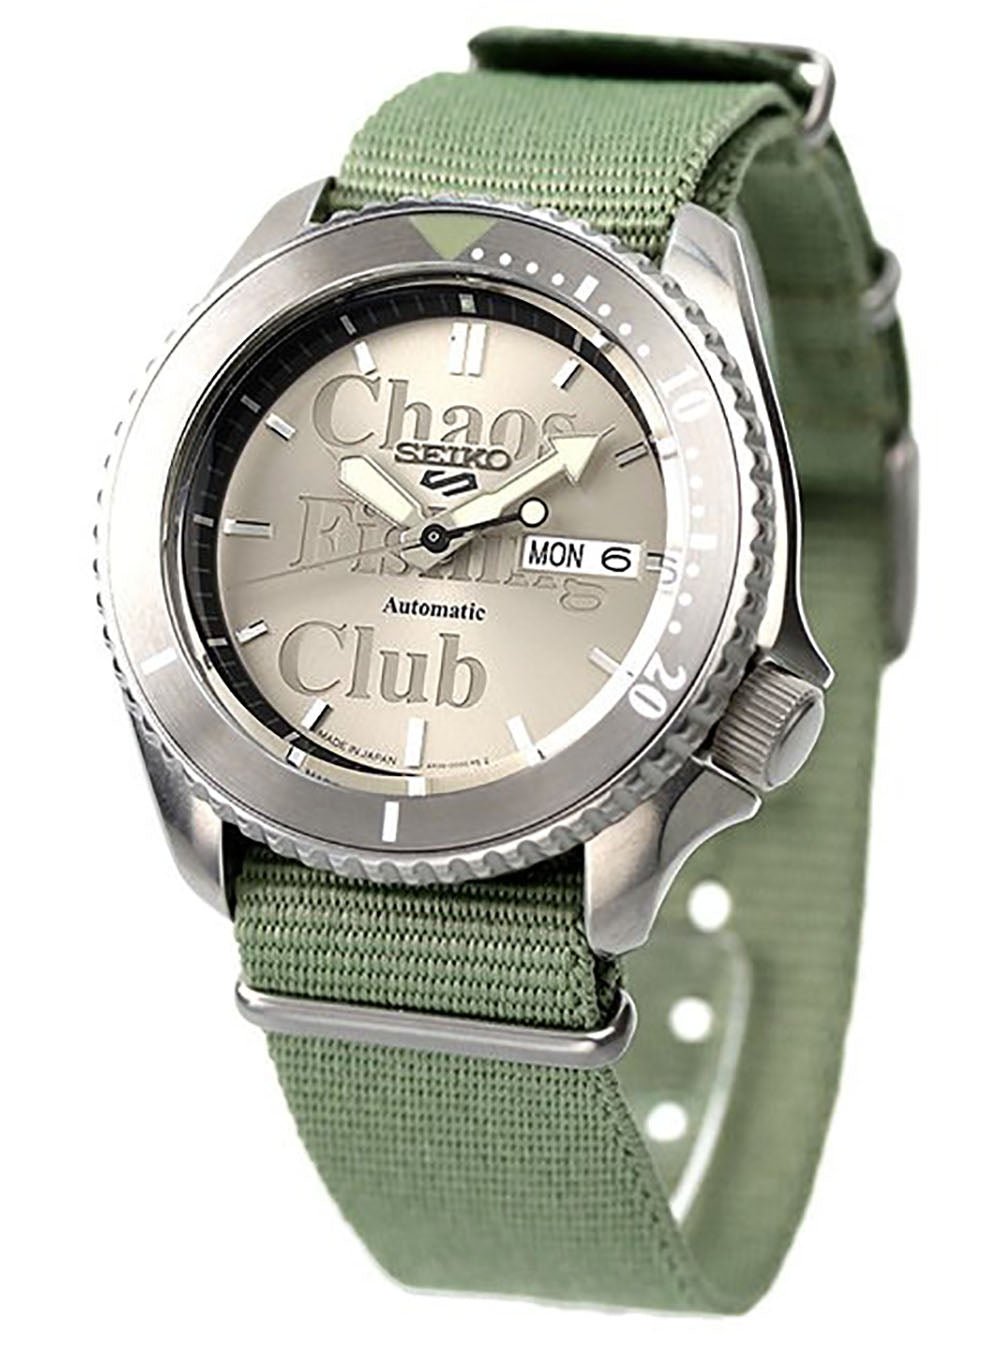 [Seiko Watch] Watch Five Sports Chaos Fishing Club Collaboration Limited Model Sbsa169 Men's Green, Size: One size, Silver